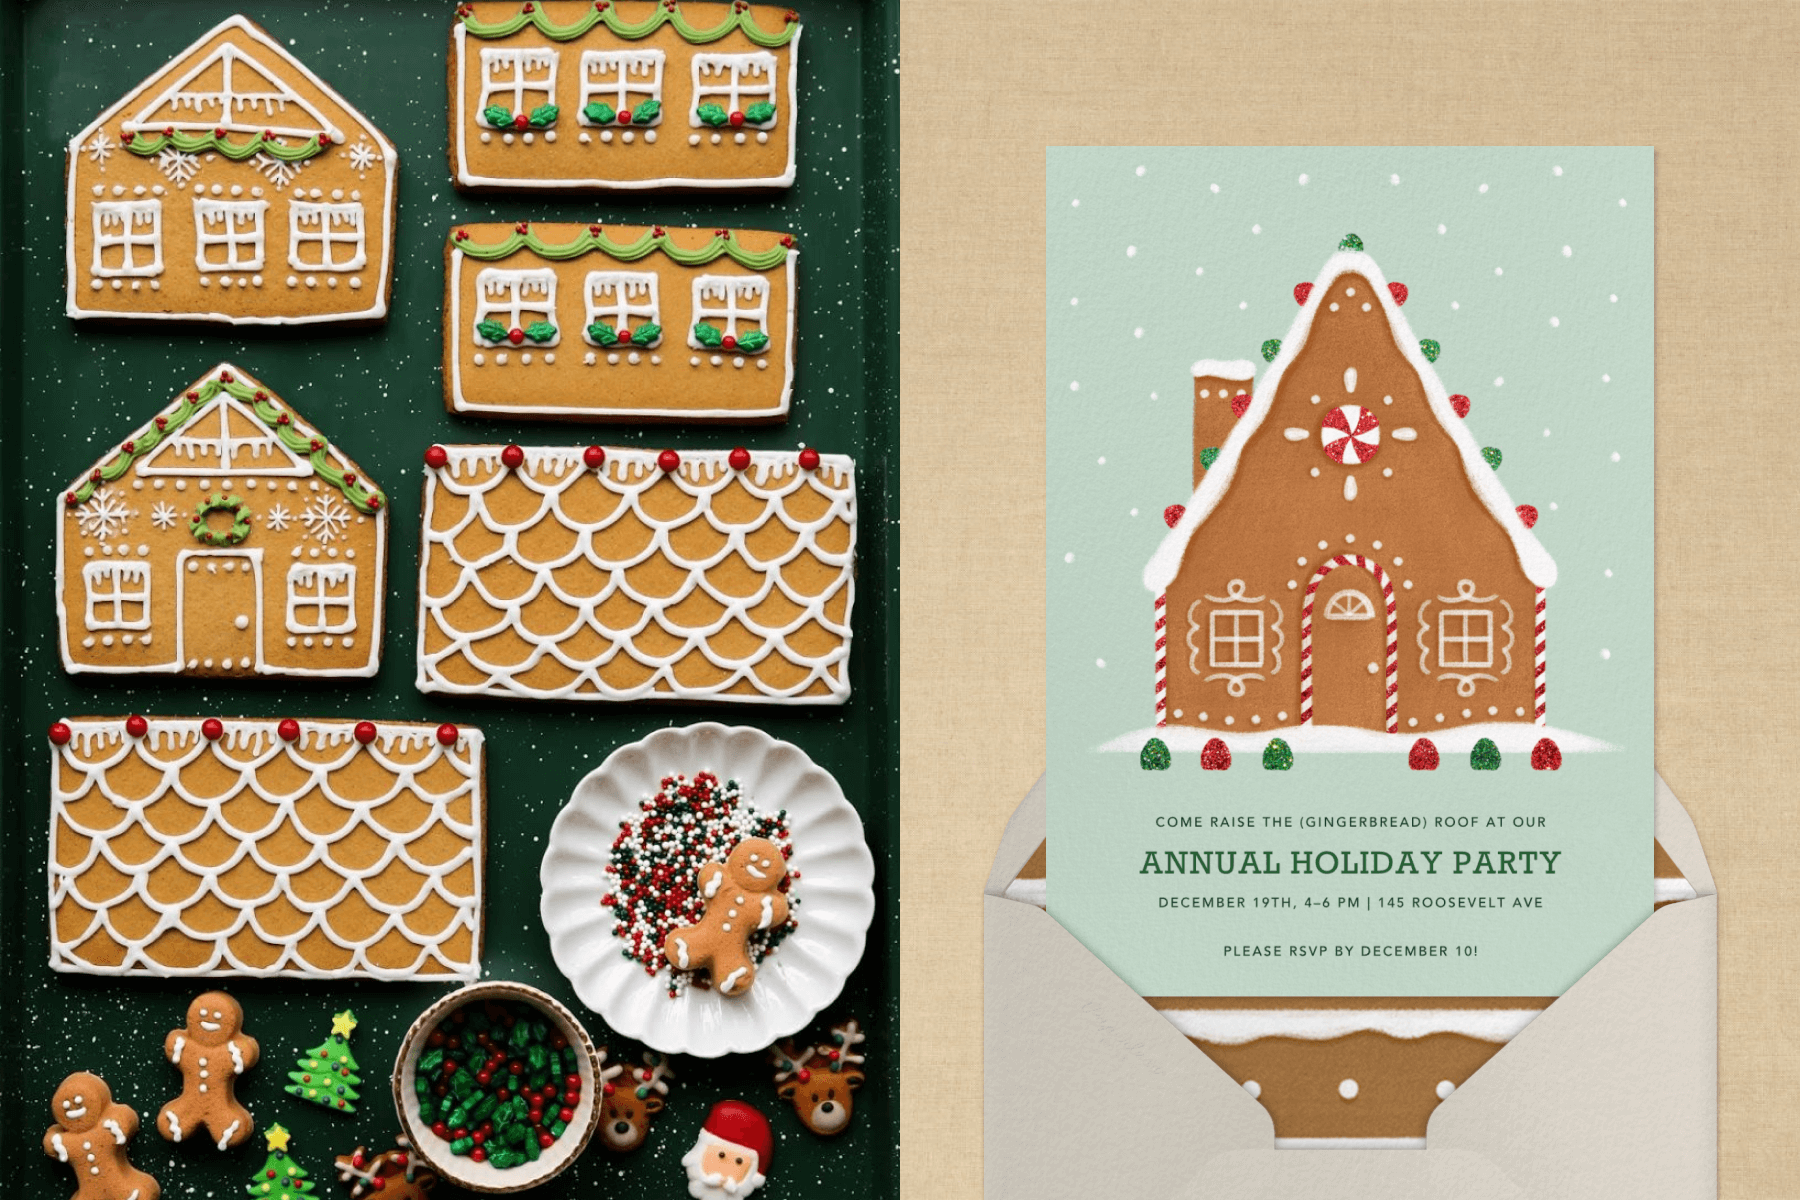 Left: Gingerbread house components; Right: A holiday party invitation with a gingerbread illustration.